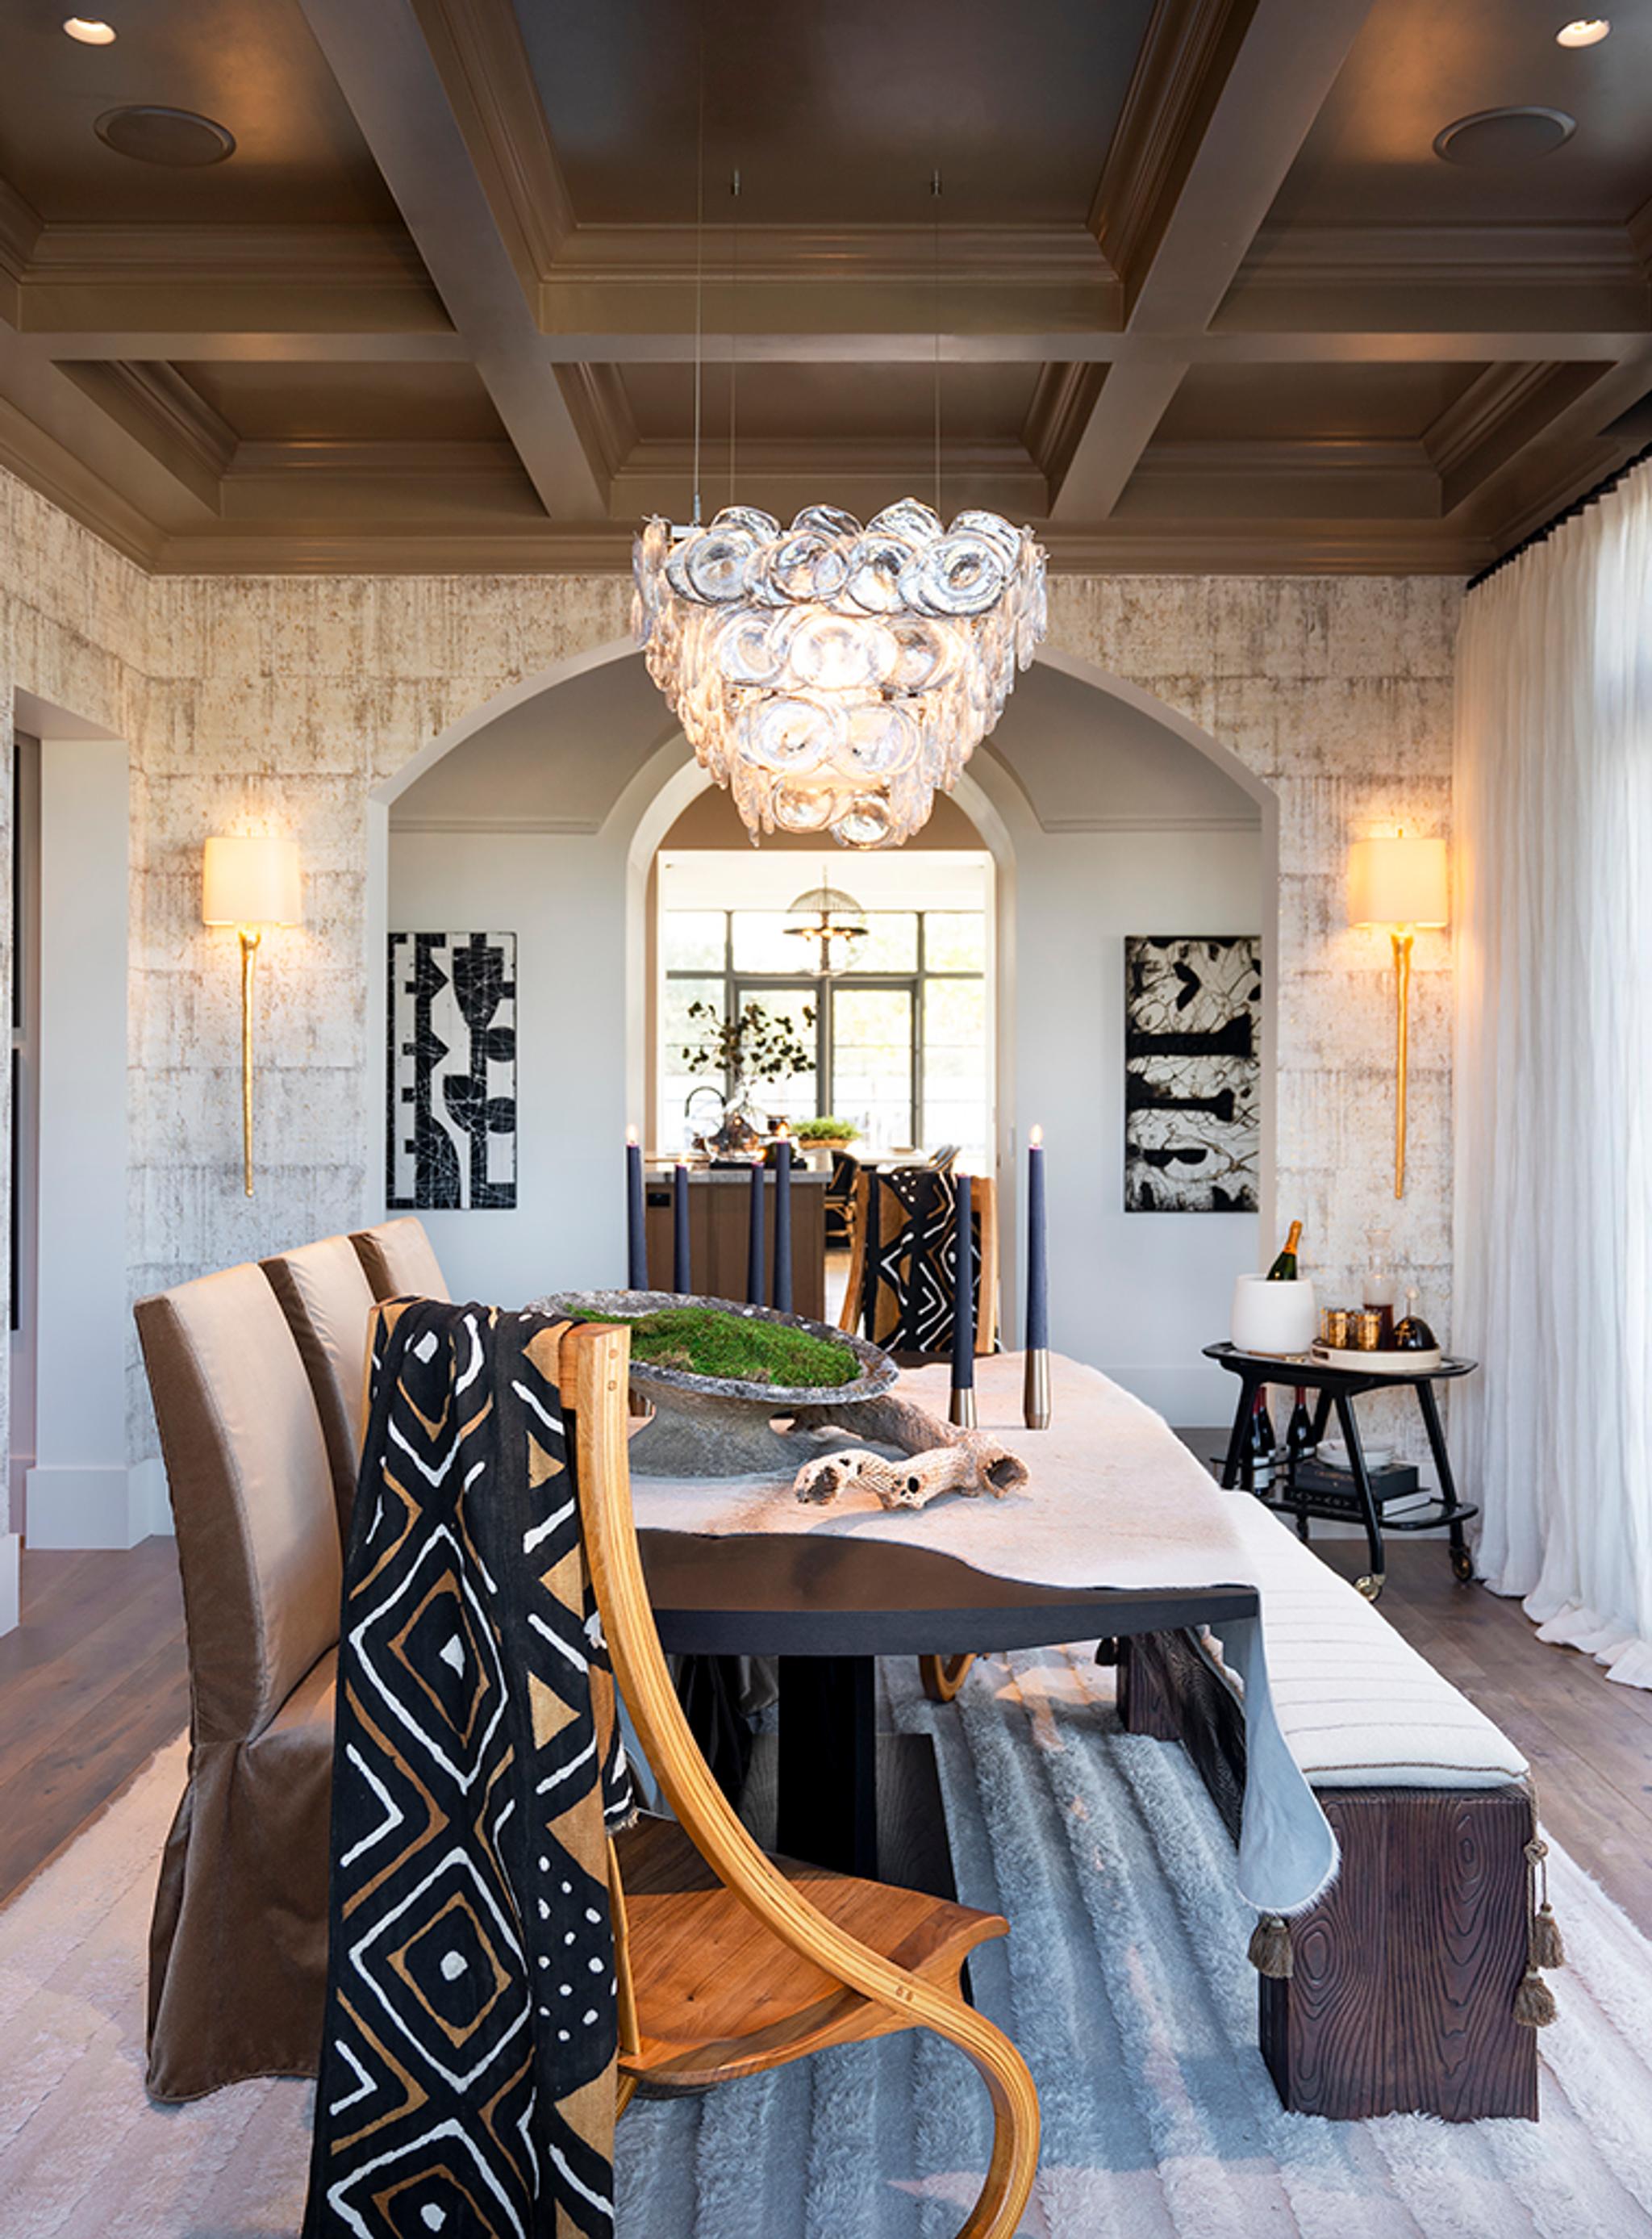 Desert tones bring the outside in for this Paradise Valley dining room